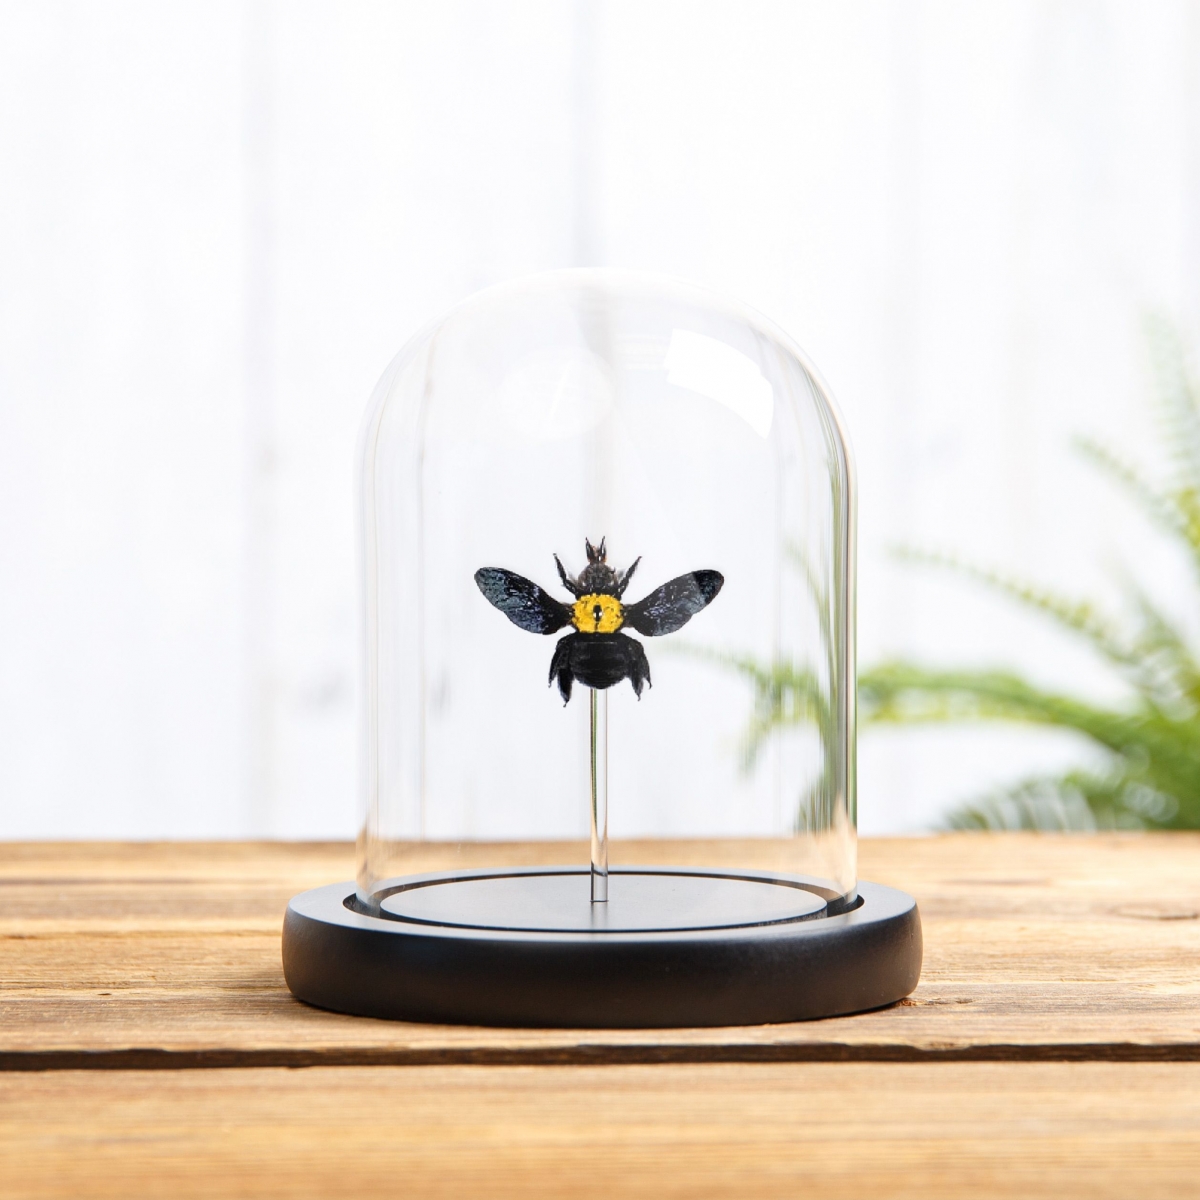 Minibeast The Yellow Spot Carpenter Bee in Glass Dome with Wooden Base (Xylocopa confusa)